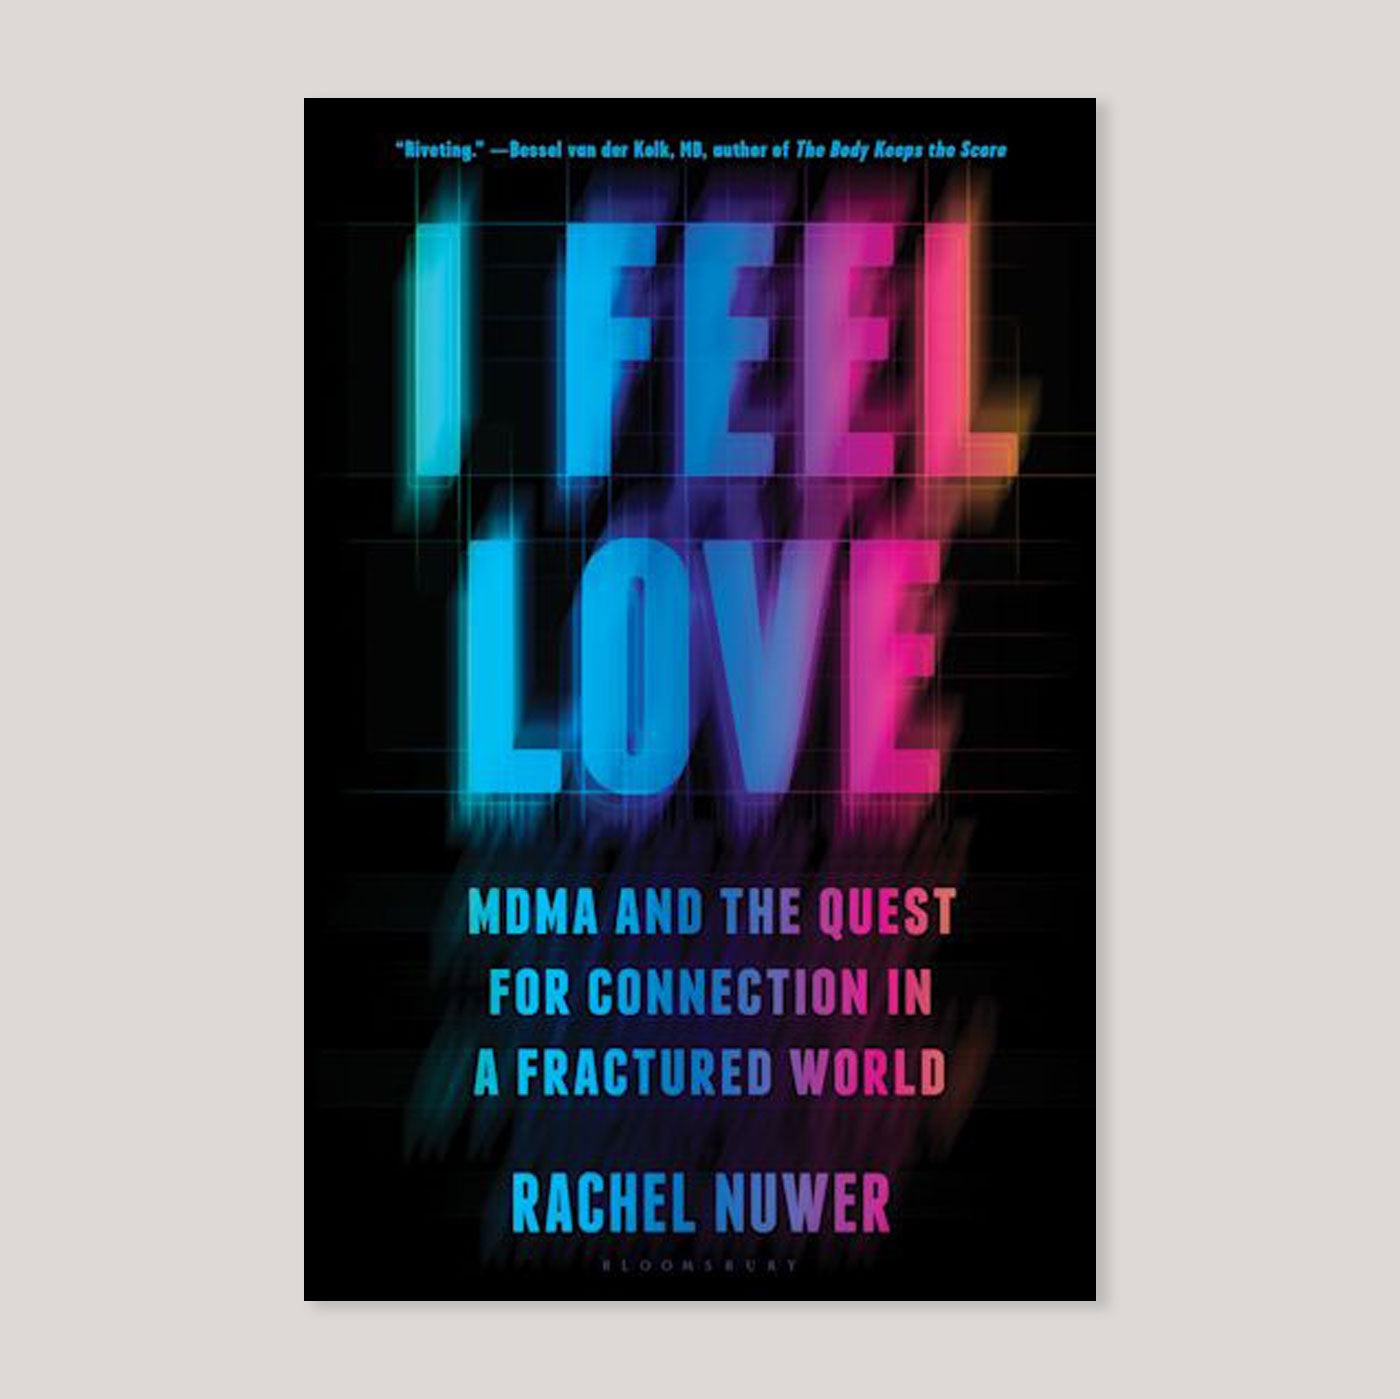 I Feel Love: MDMA and the Quest for Connection in a Fractured World | Rachel Nuwerj